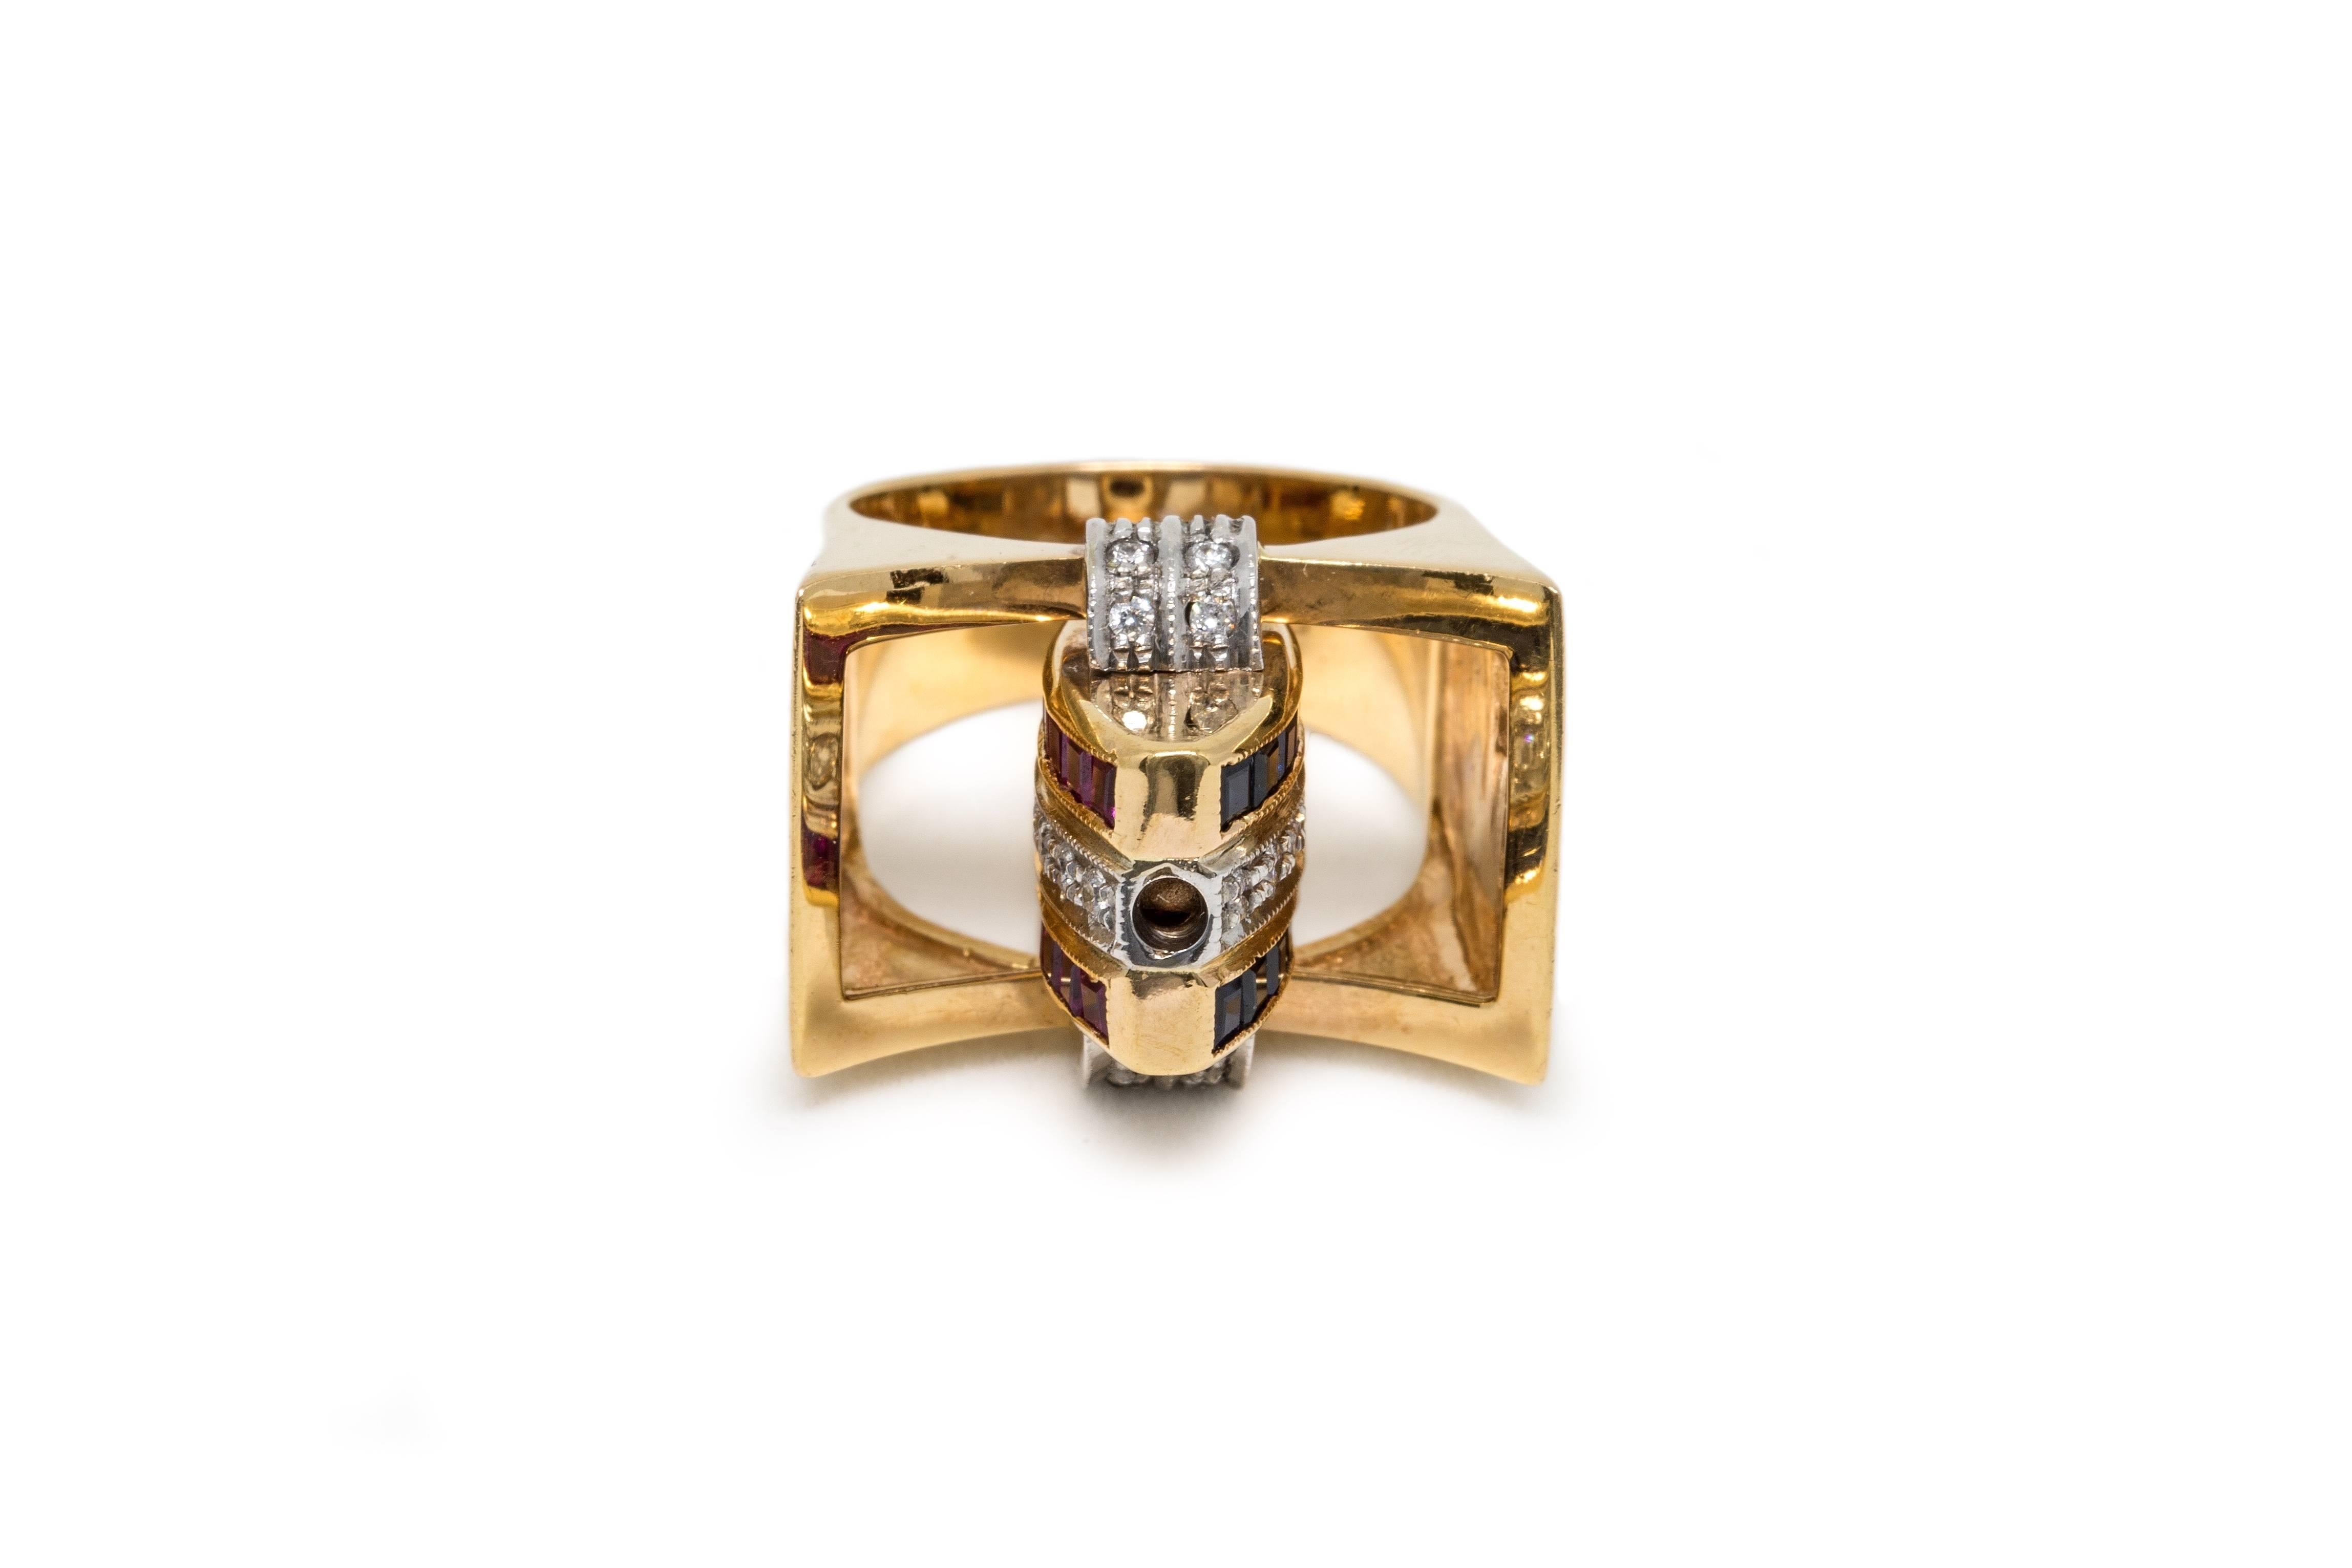 An unusual ruby, sapphire and diamond swivel ring set in 18K yellow gold. The middle section swivels so that you can have on show the sapphires or the rubies. 

The swivel section made with a line of diamonds framed by two bands of square cut